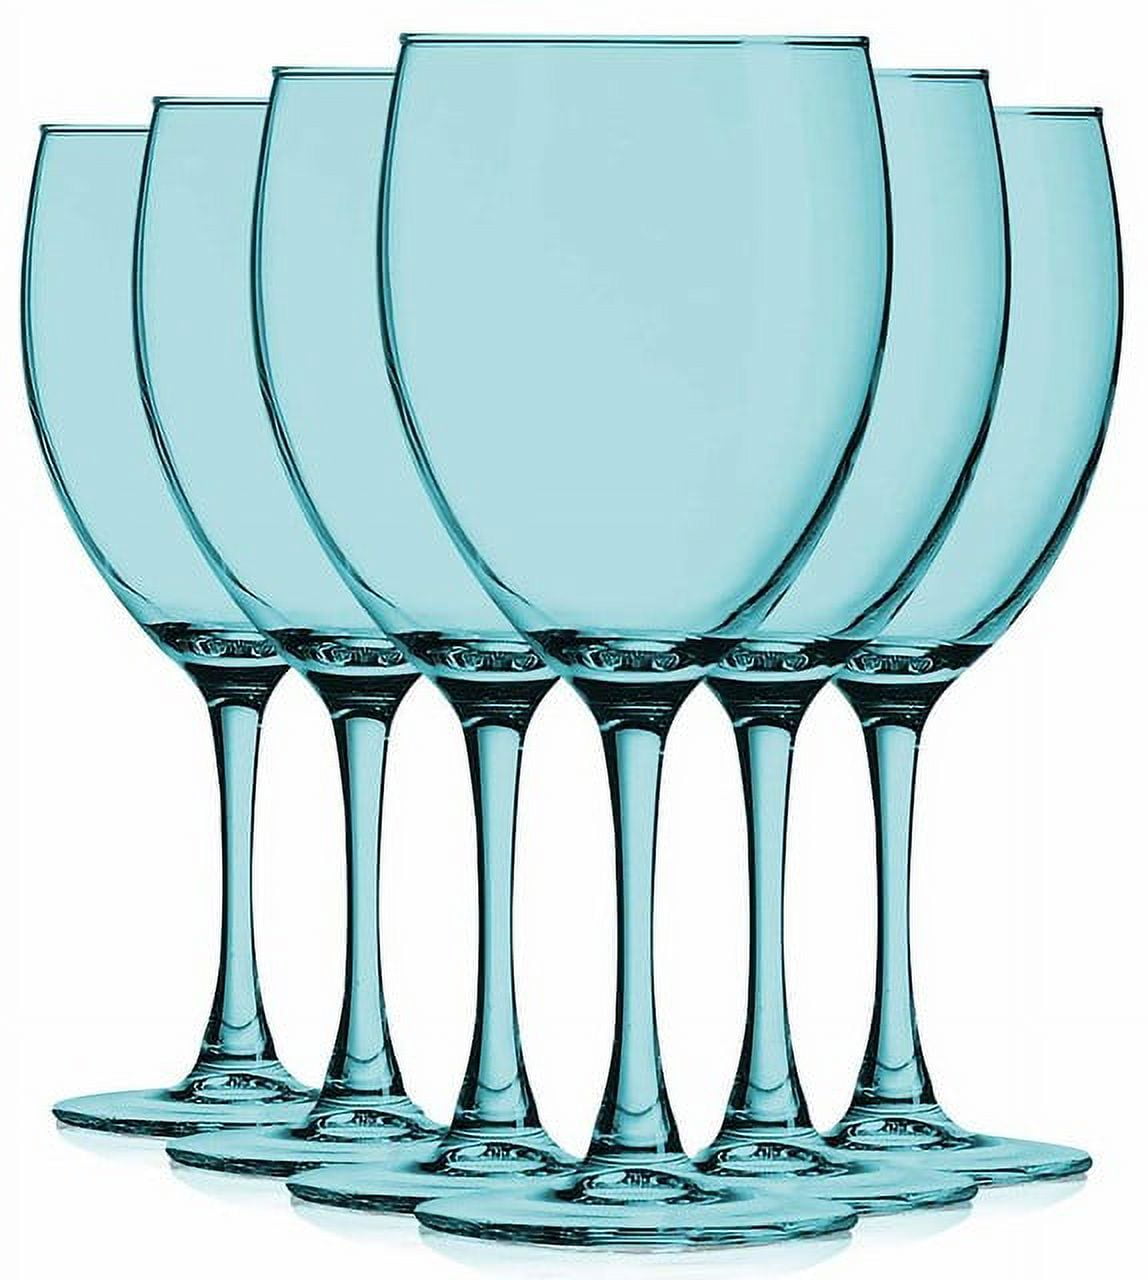 Tiffany Home Essentials Red Wine Glasses in Crystal Glass, Set of